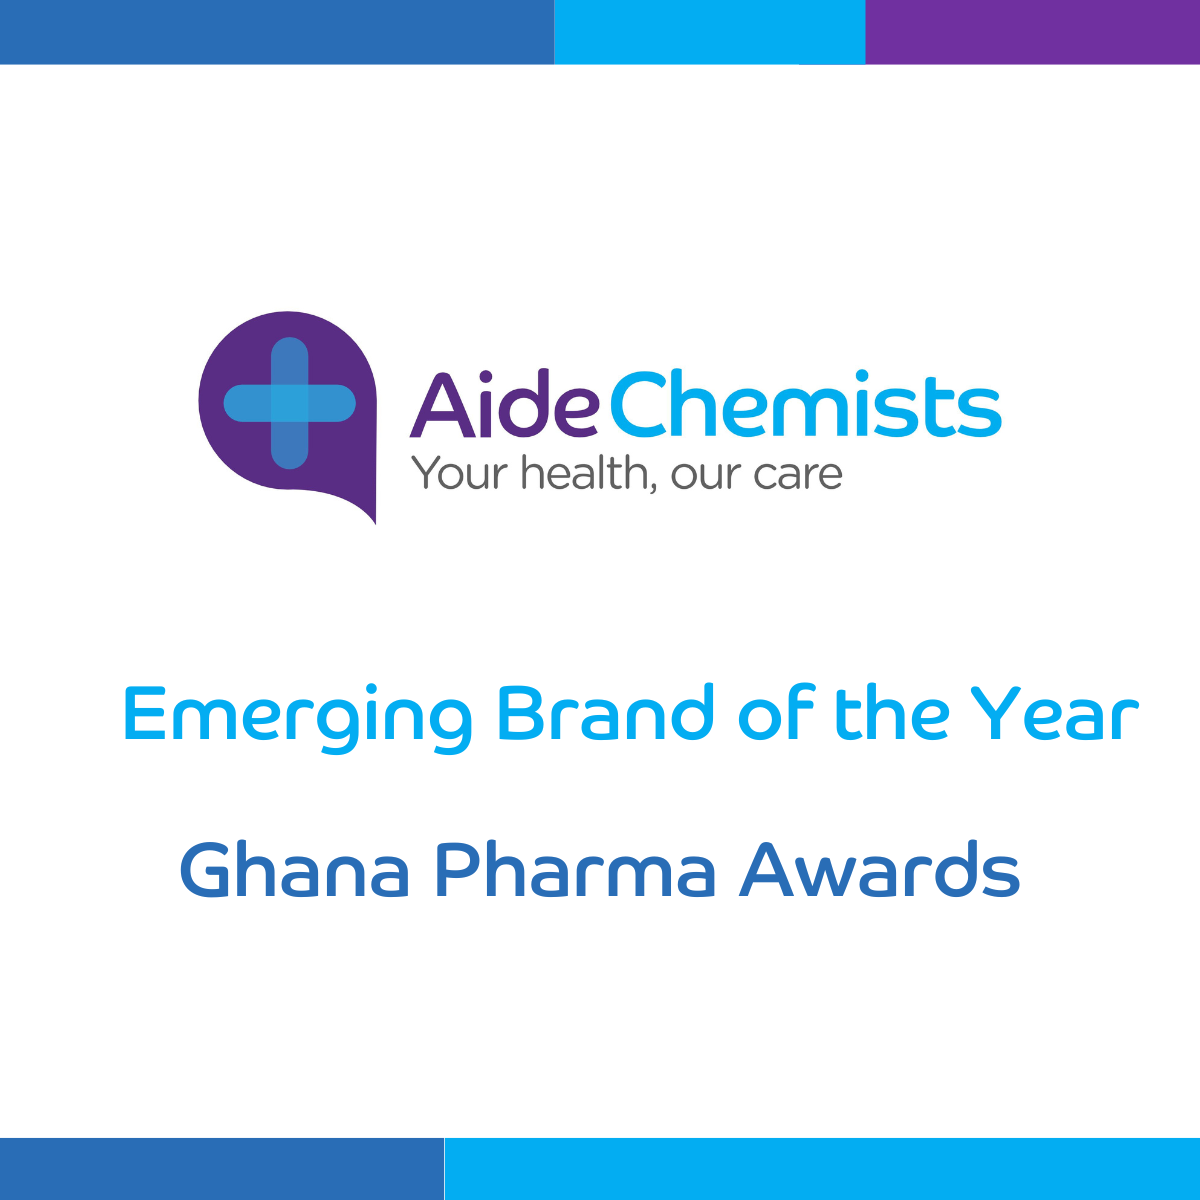 Aide Chemists sets pace, wins ‘Emerging Brand of the Year’ award